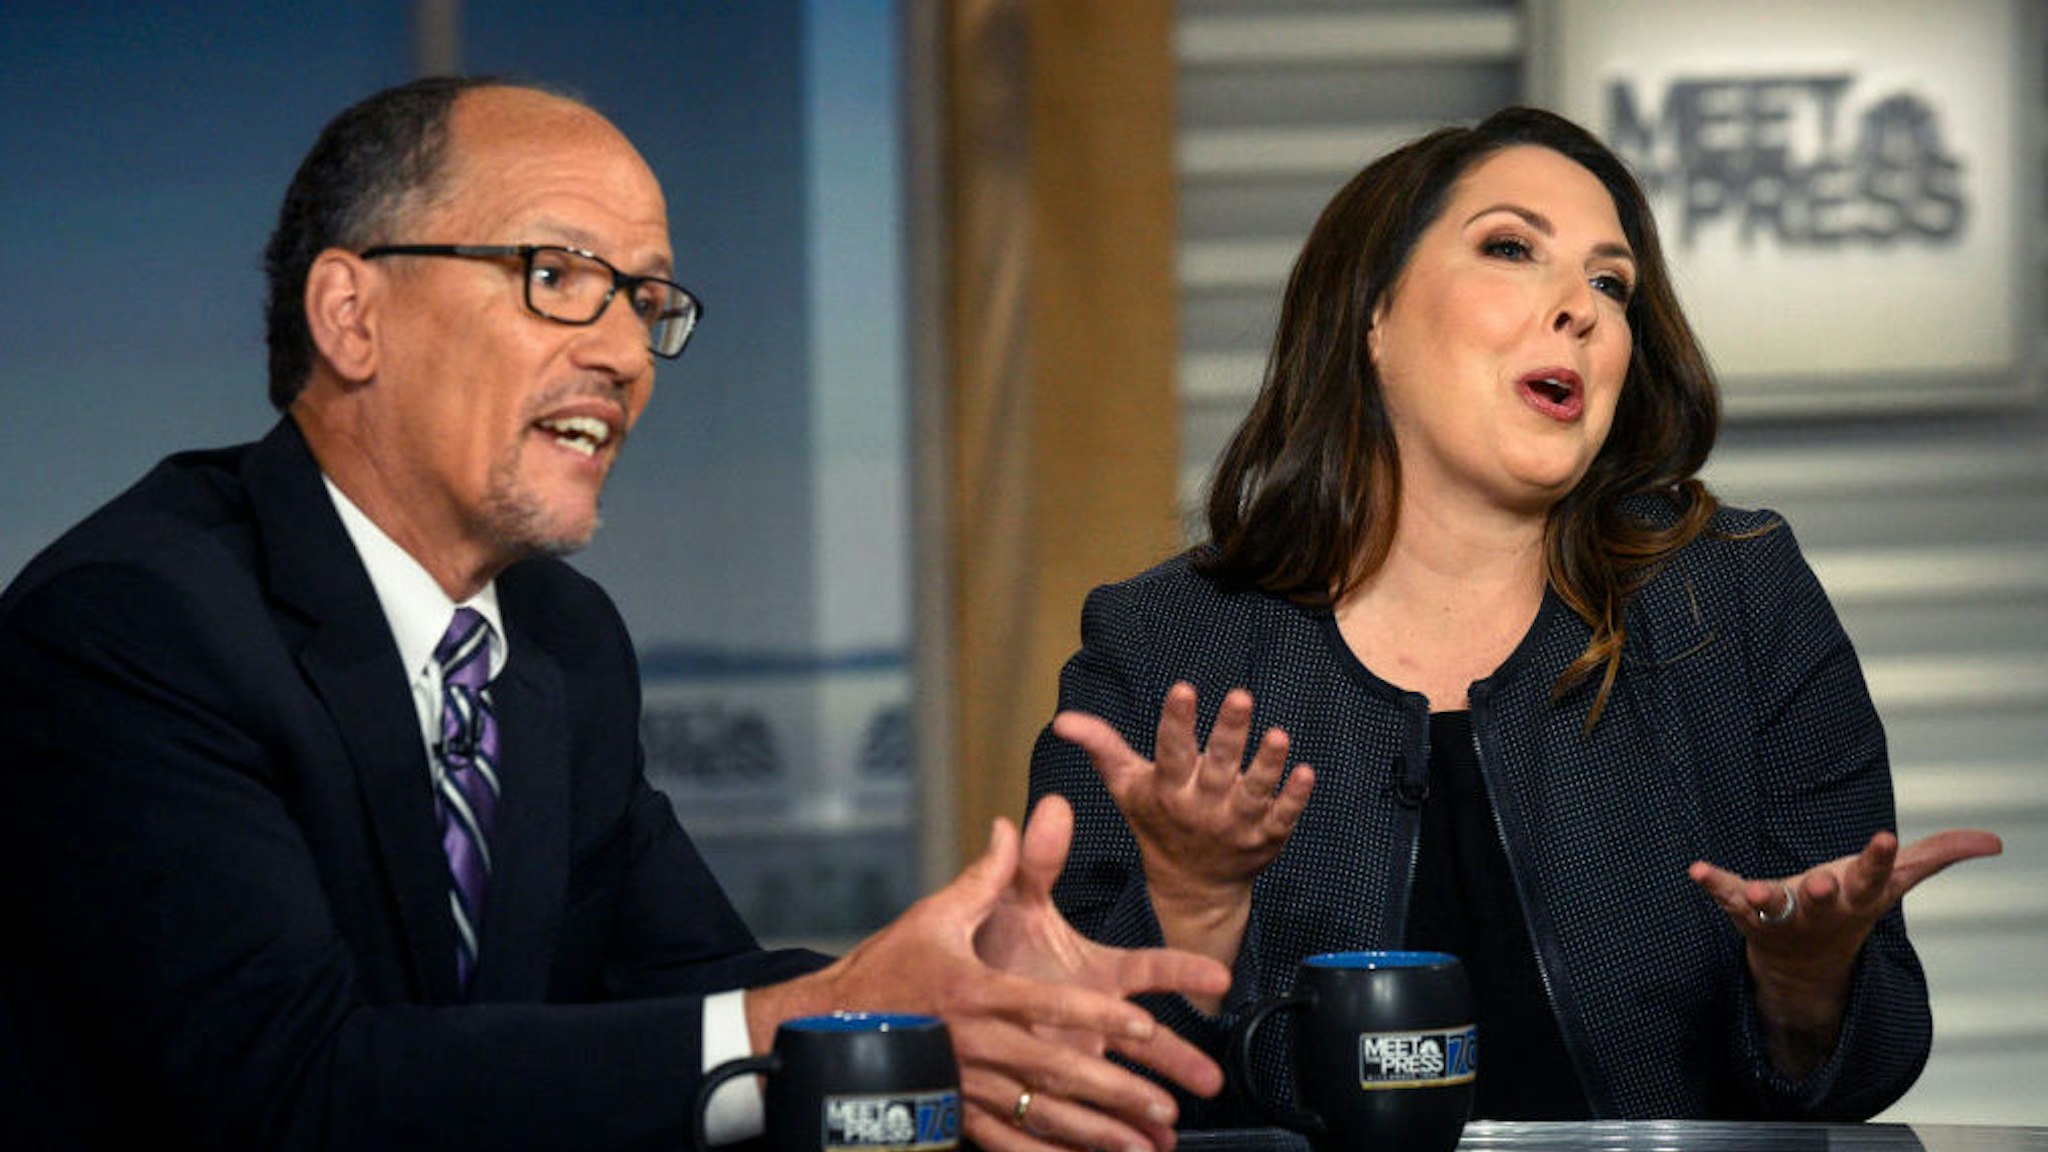 DNC Chair Tom Perez and RNC Chair Ronna McDaniel appear on "Meet the Press" in Washington, D.C., Sunday, July 9, 2017.